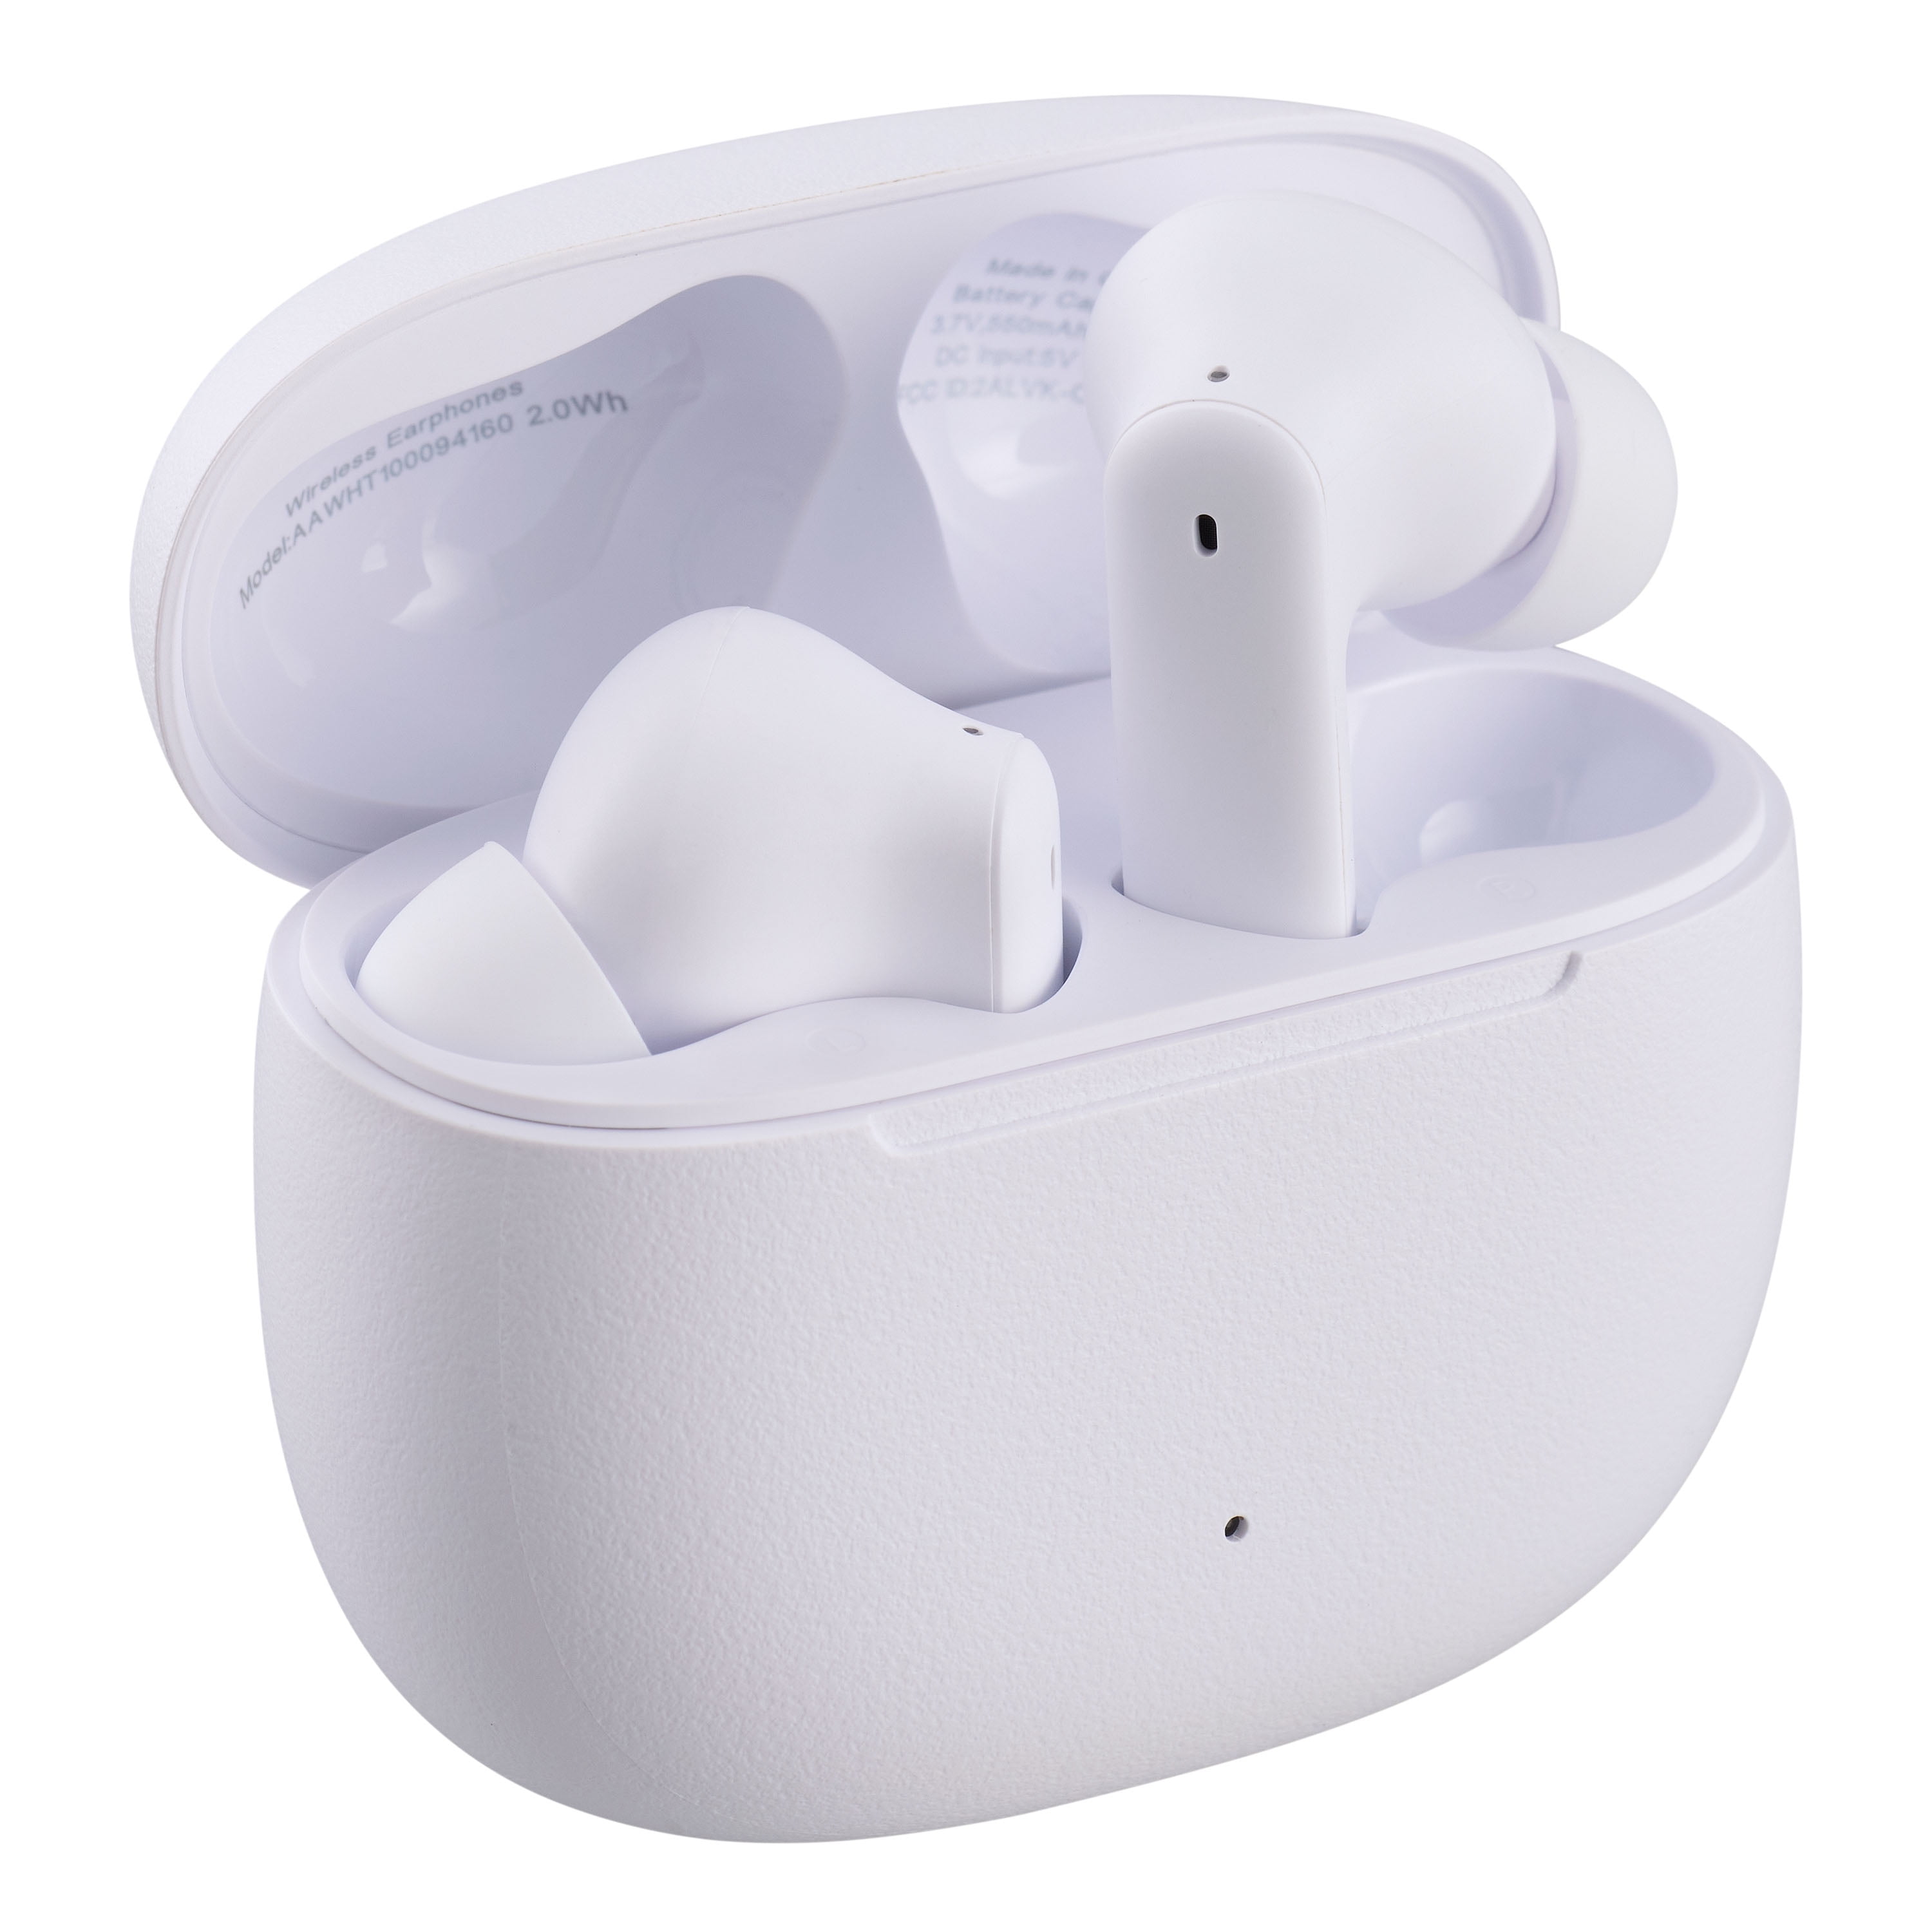 onn. Wireless In-Ear Bluetooth Earphones with Active Noise Cancellation/Ambient Sound, White